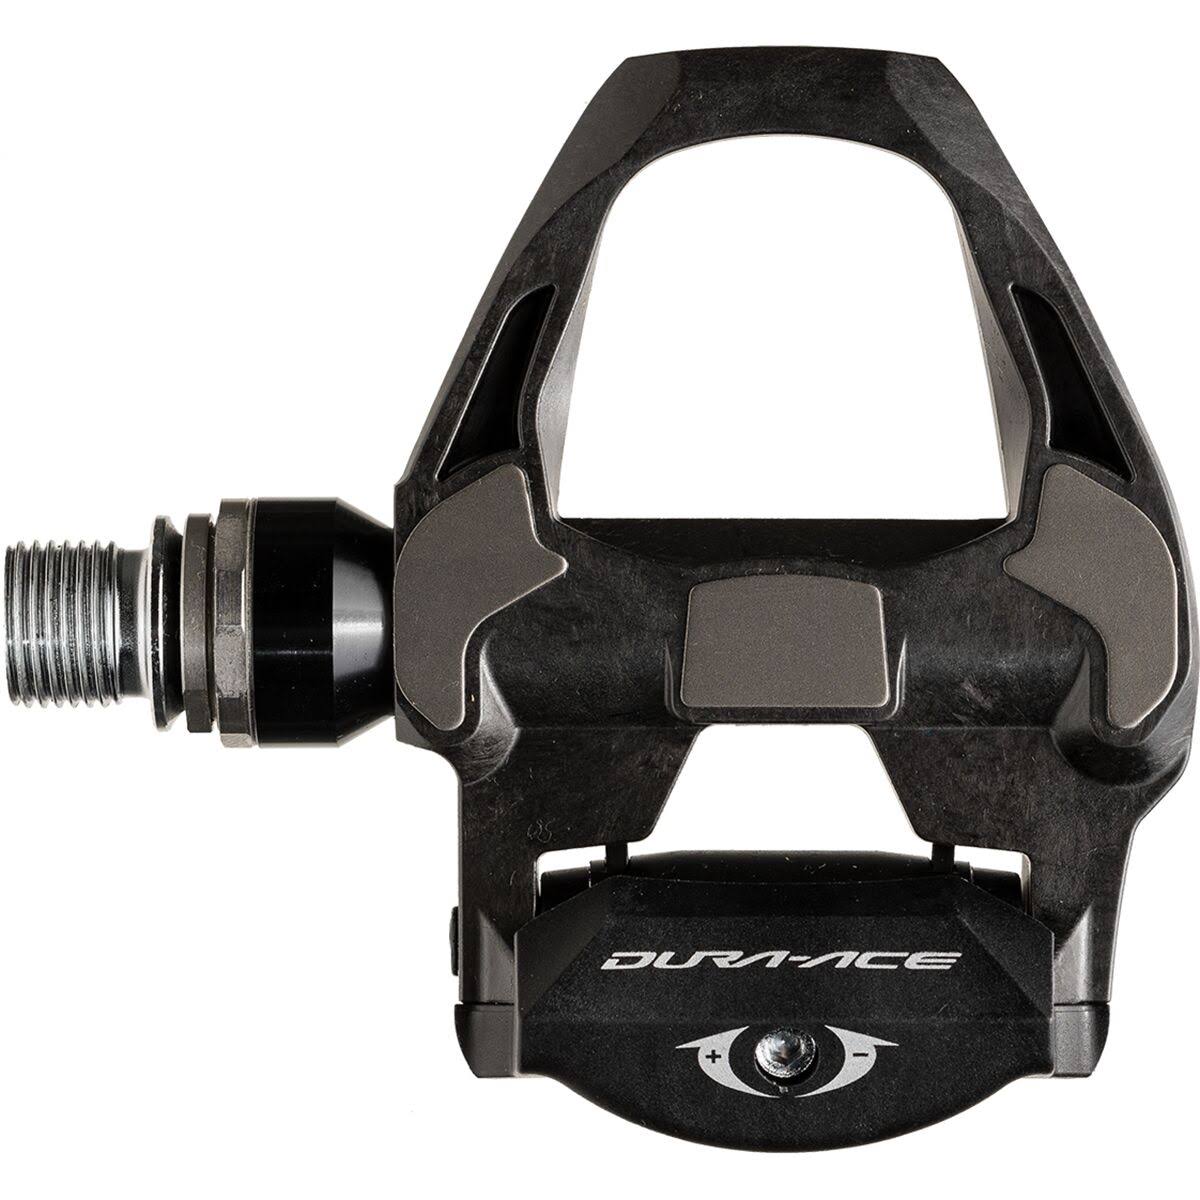 Shimano Dura Ace PD-R9100 Carbon SPD-SL Road Bike Pedals - Standard Type